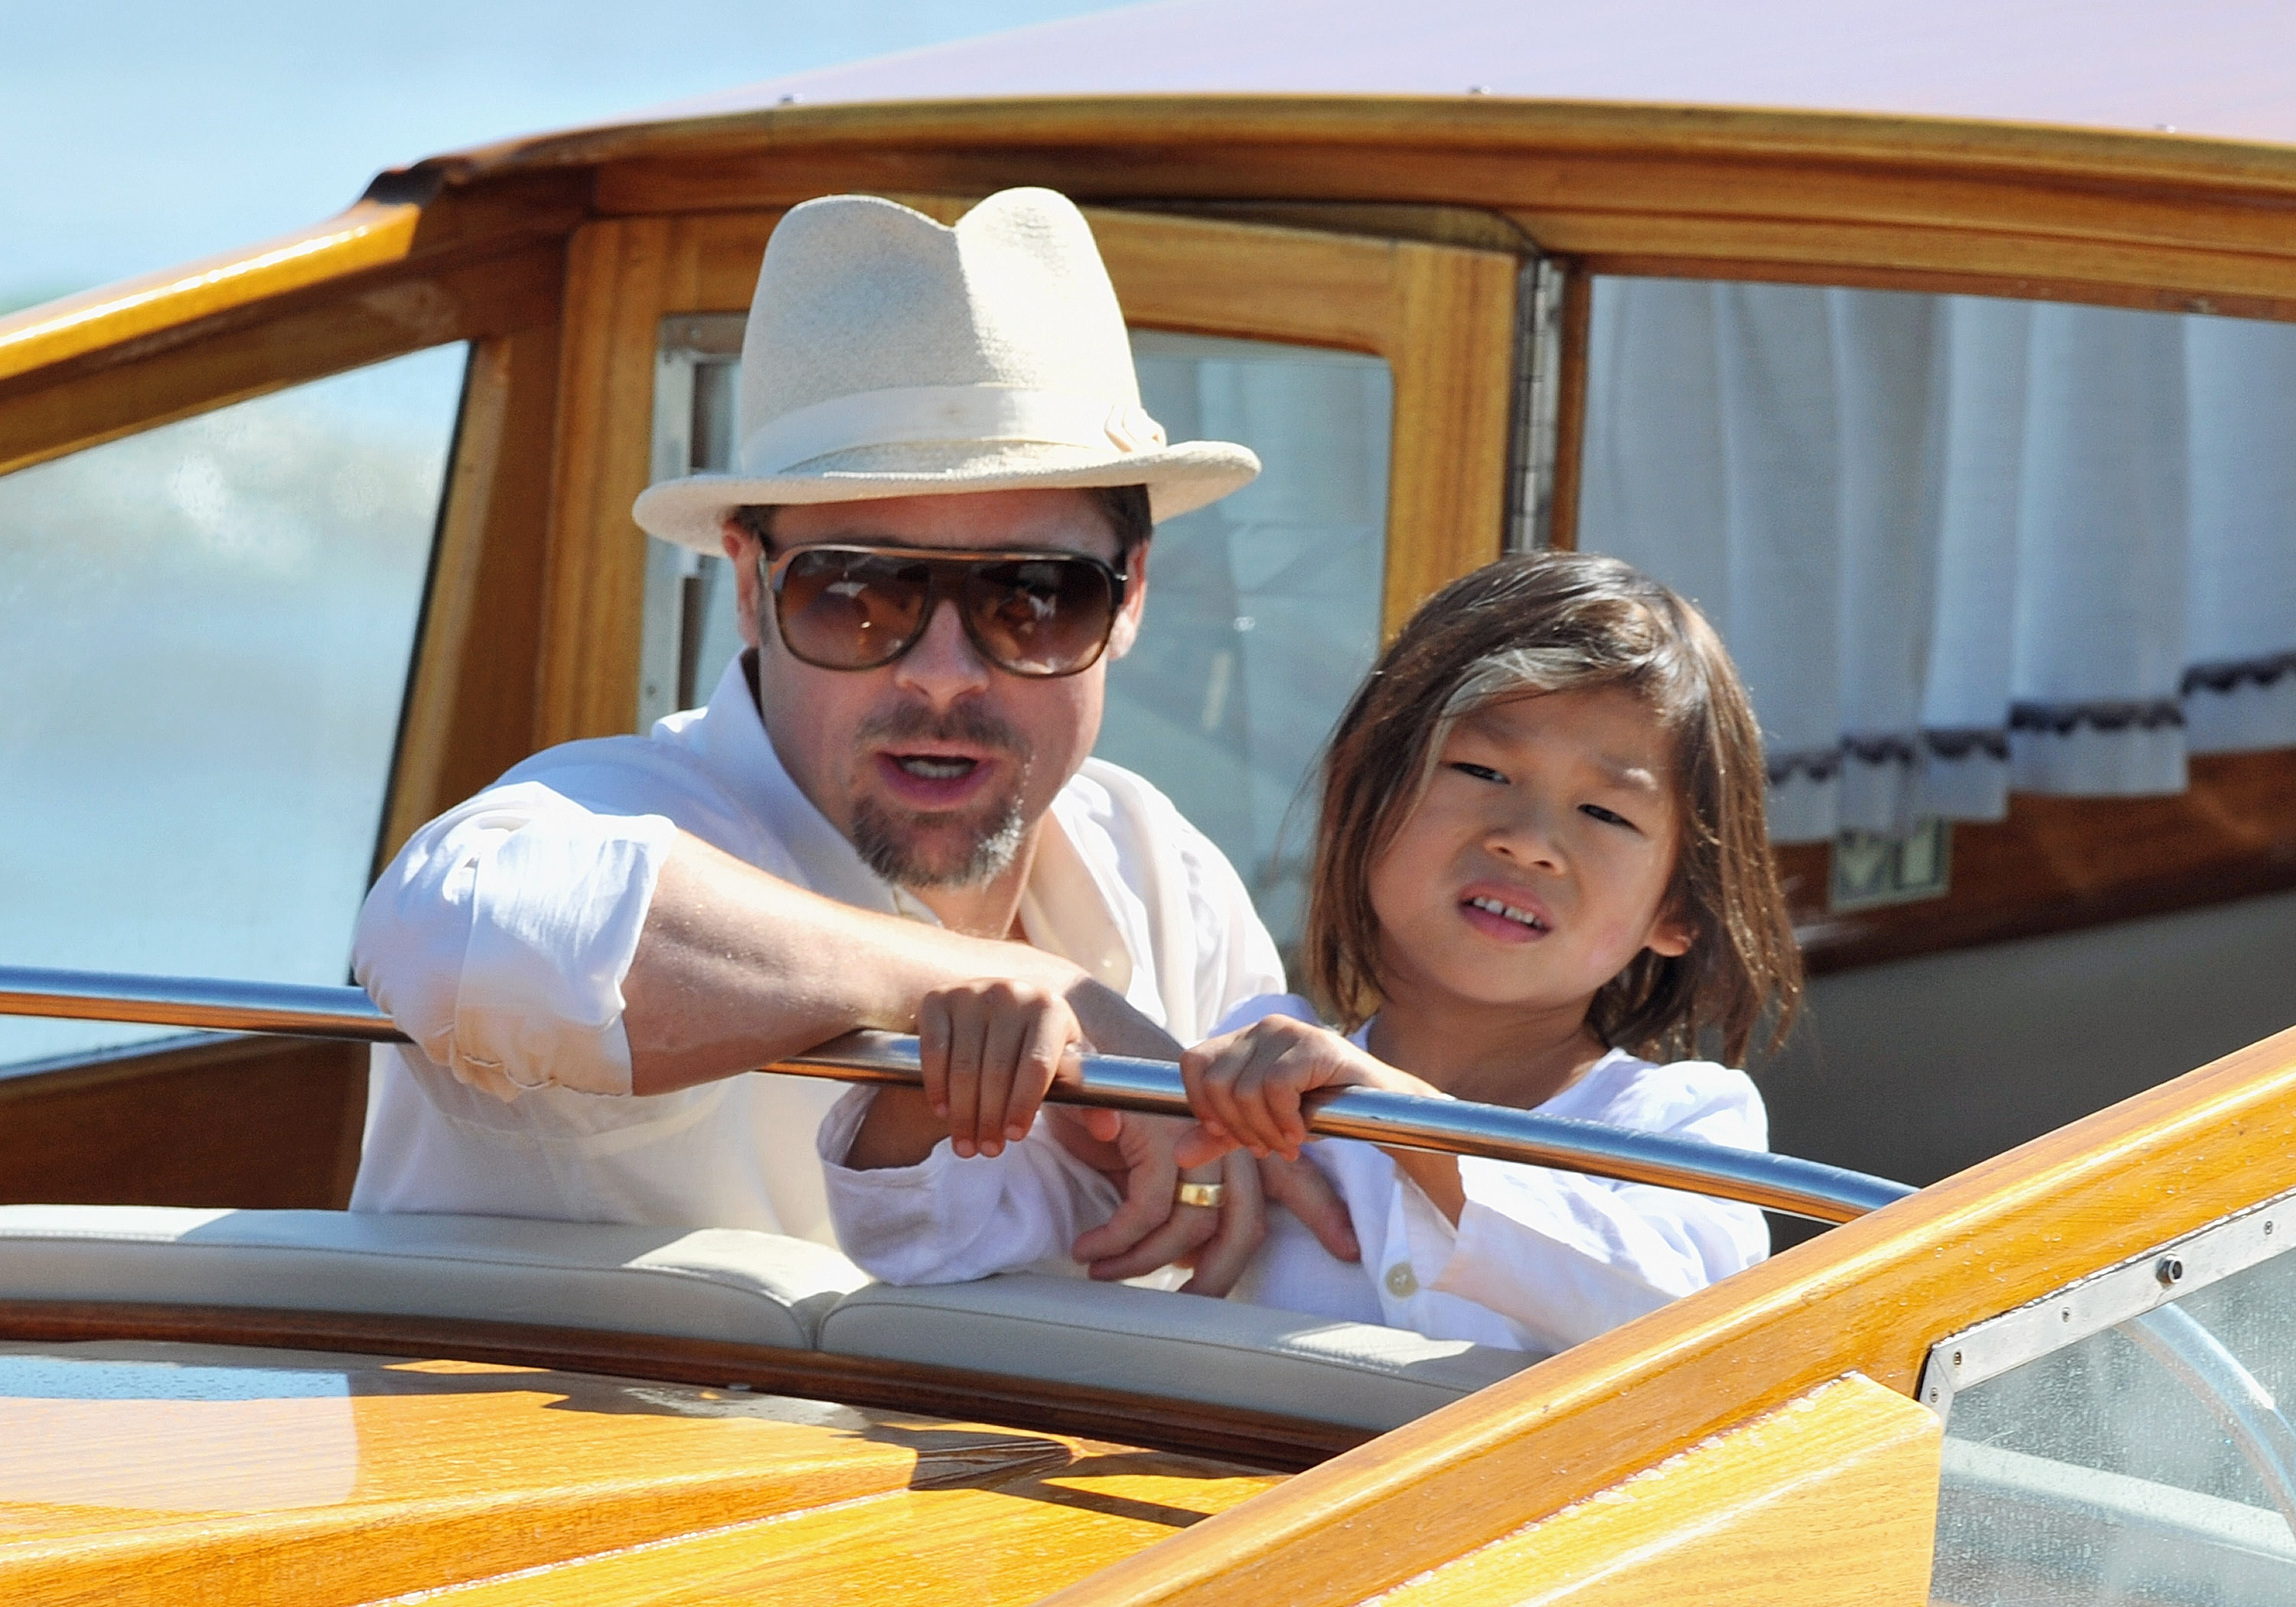 Brad Pitt and son Pax Thien Jolie-Pitt on a boat ride on August 26, 2008 in Venice Italy | Source: Getty Images